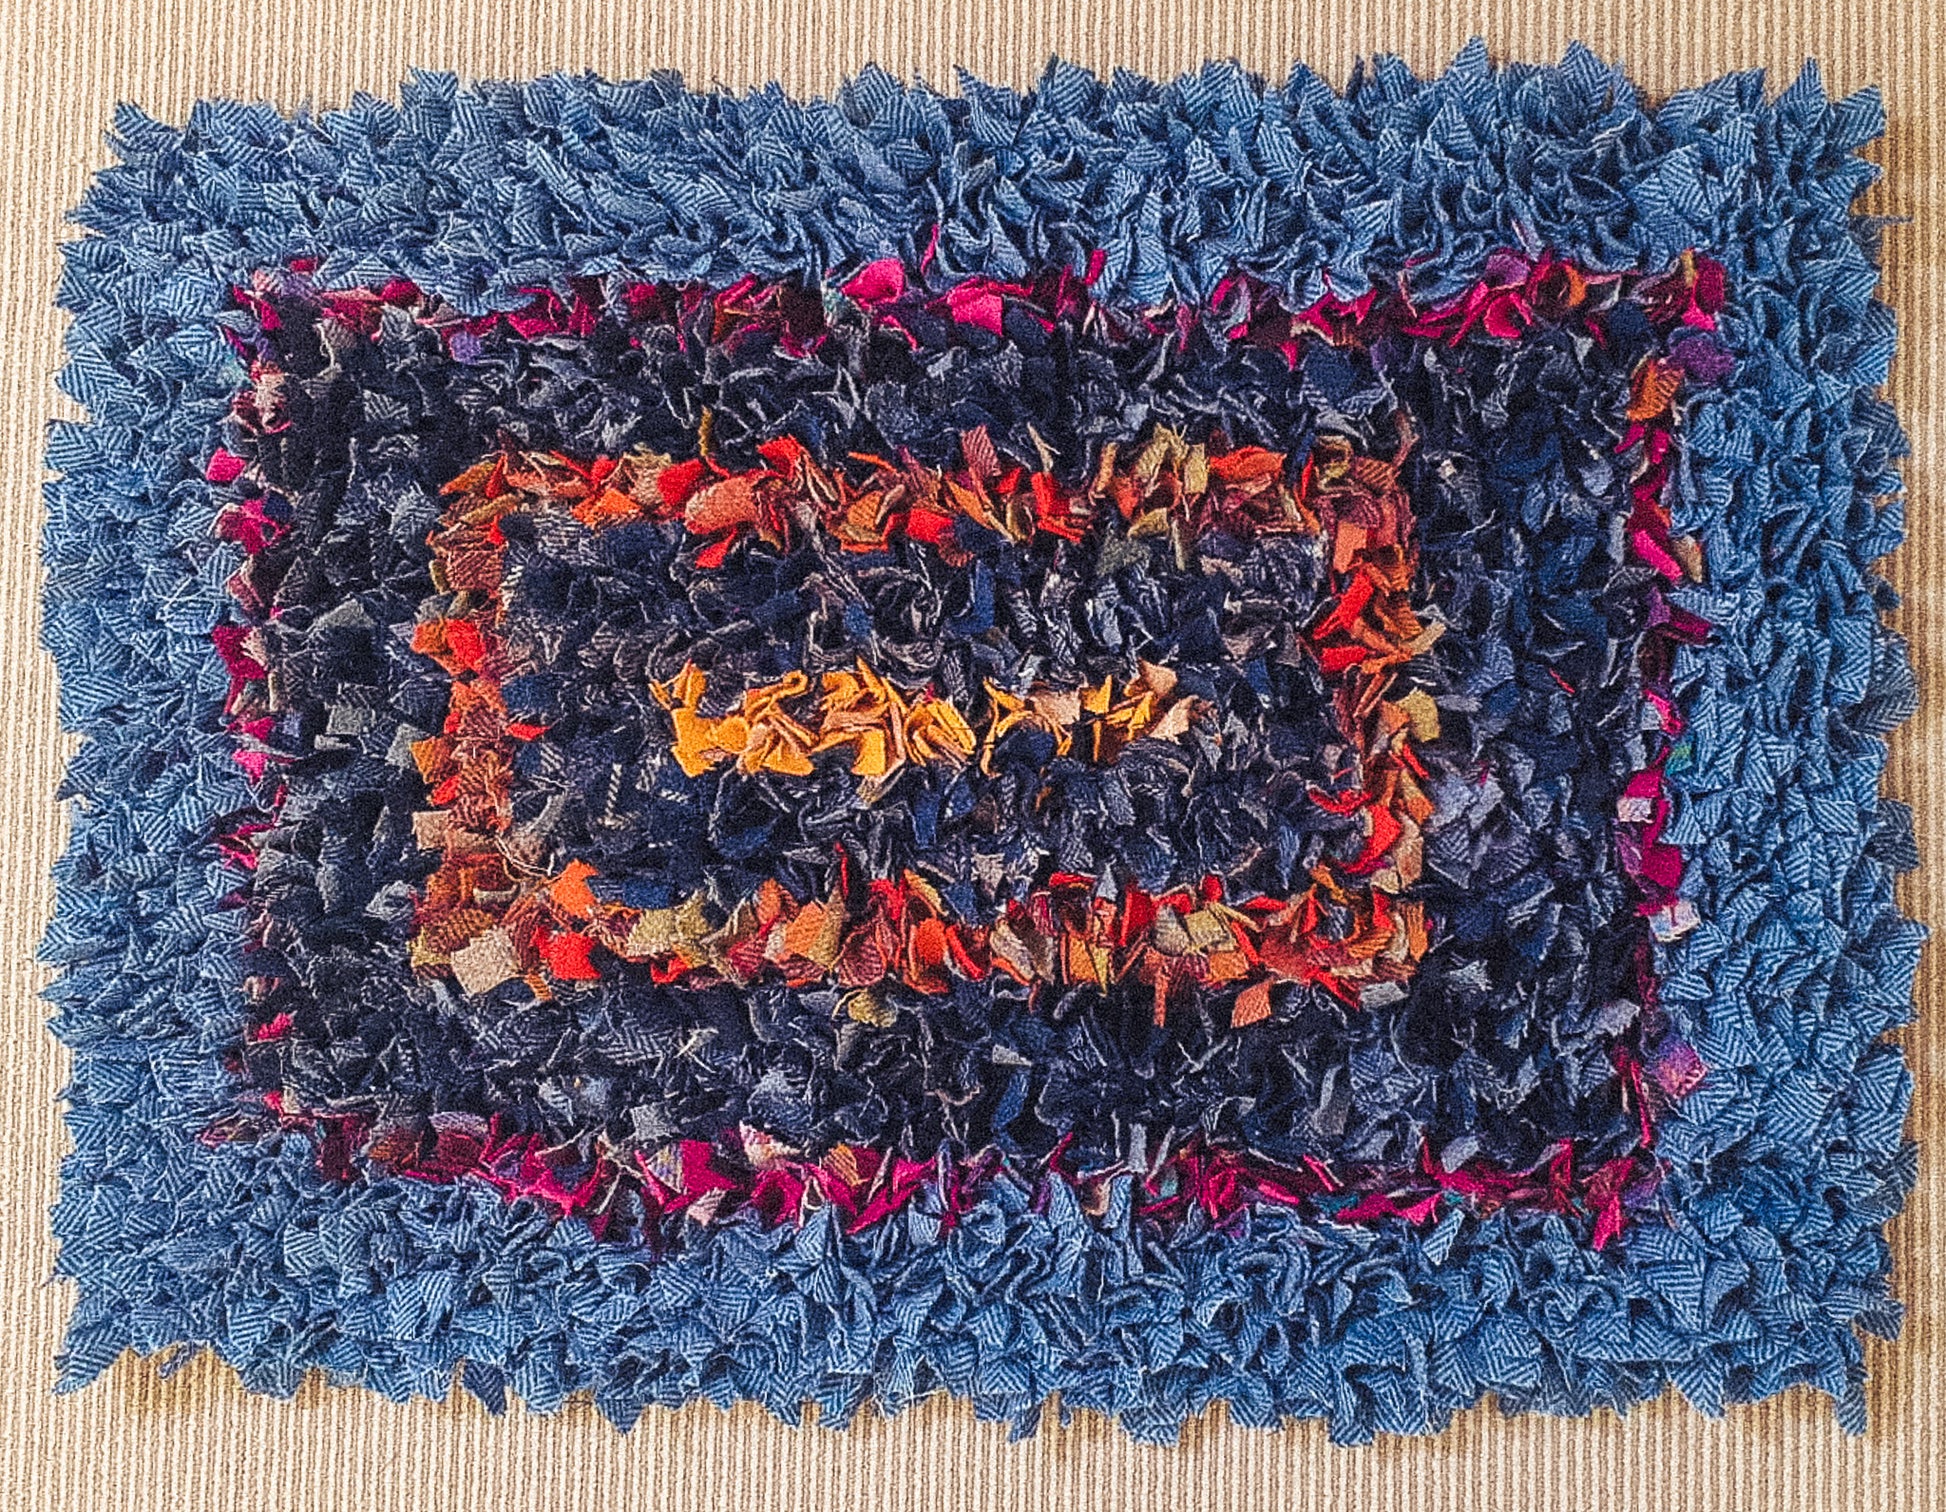 Handmade Concentric Rectangles Rag Rug - A 2ft x 3ft hessian and wool rug with predominantly blue rectangles, accented by contrasting red and orange rectangles